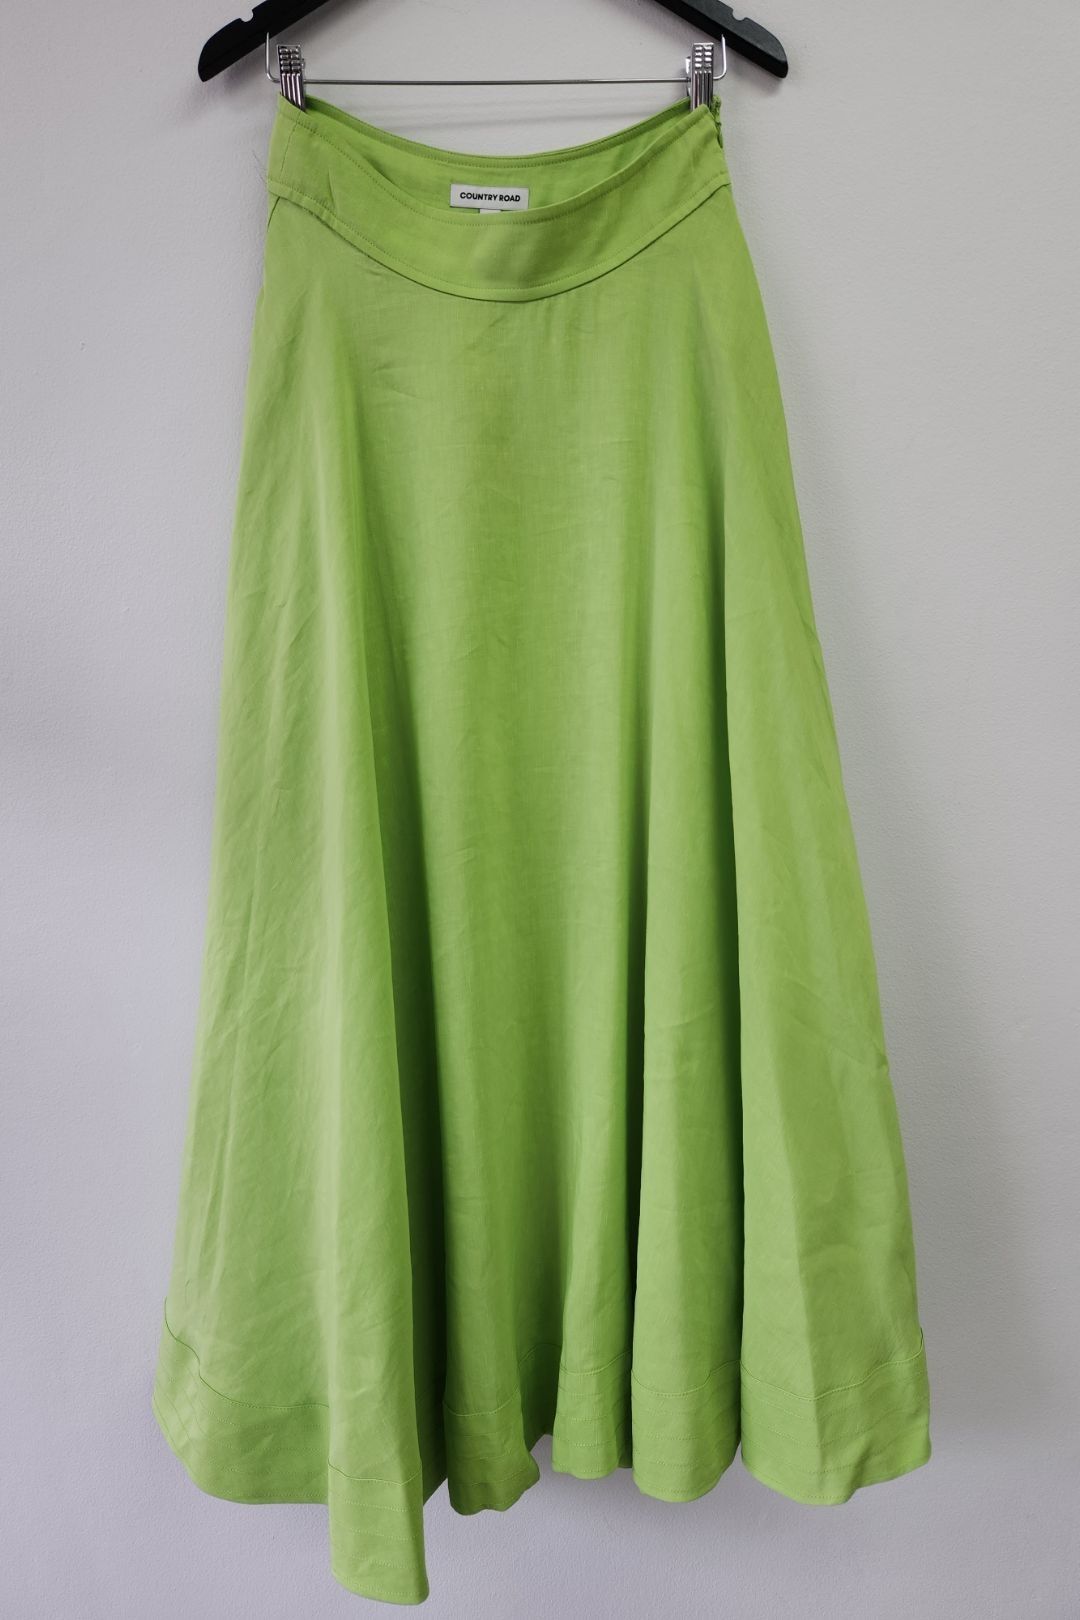 Country Road - Green Stitch Detail Maxi Skirt